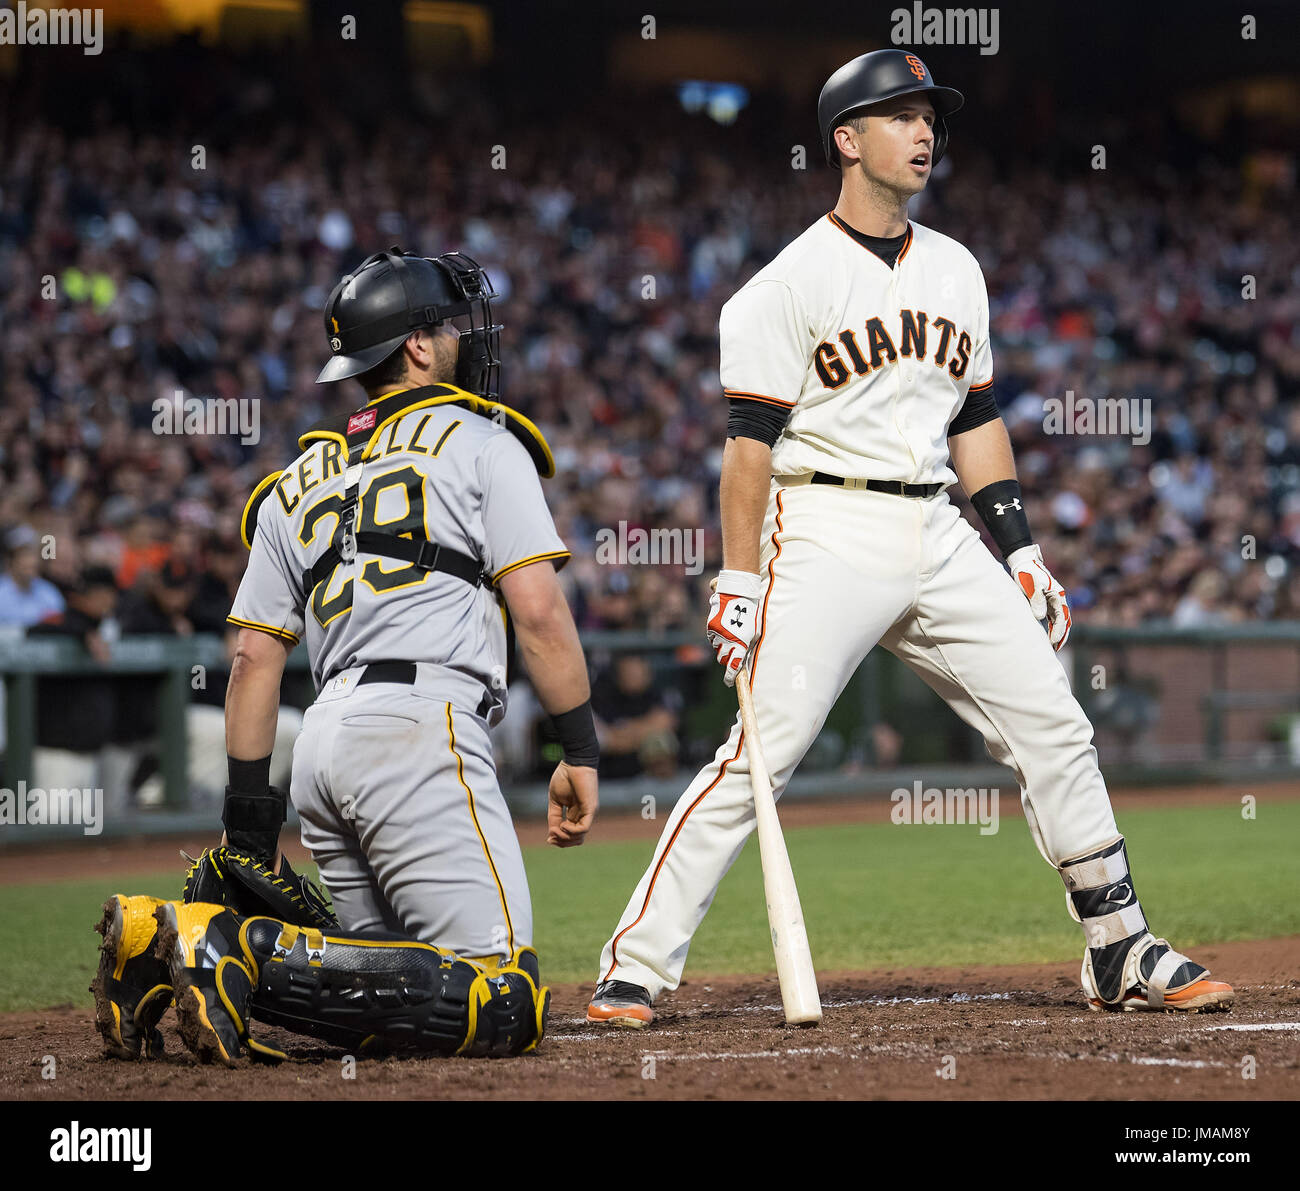 San Francisco, California, USA. 25th July, 2017. San Francisco Giants catcher Buster Posey (28) reacts to a called strike, during a MLB game between the Pittsburgh Pirates and the San Francisco Giants at AT&T Park in San Francisco, California. Valerie Shoaps/CSM/Alamy Live News Stock Photo